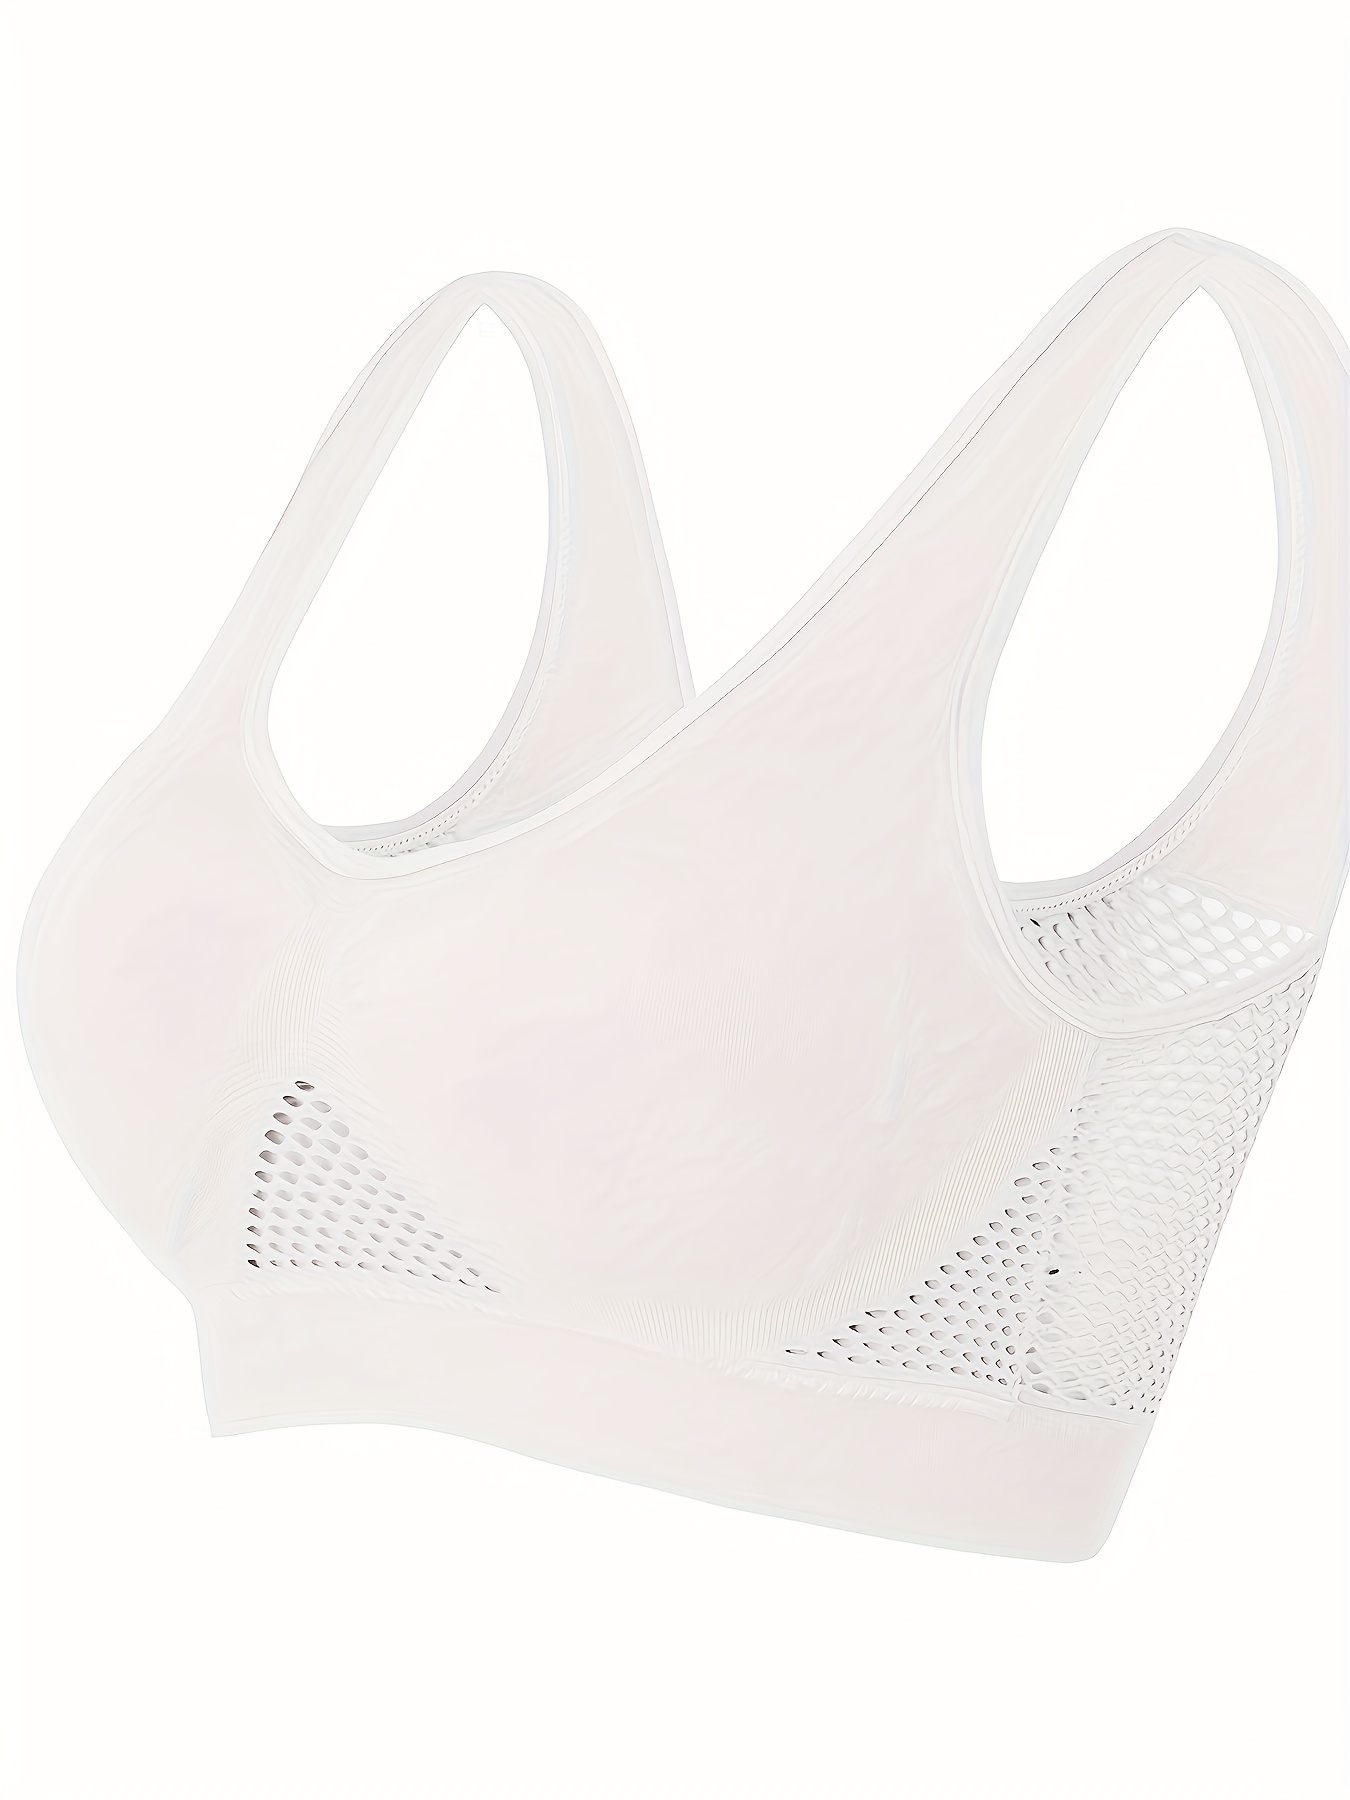 WANAYOU Breathable Sports Bras,Women Hollow Out Padded Sports Bra Top, –  Best Choice Goods Inc